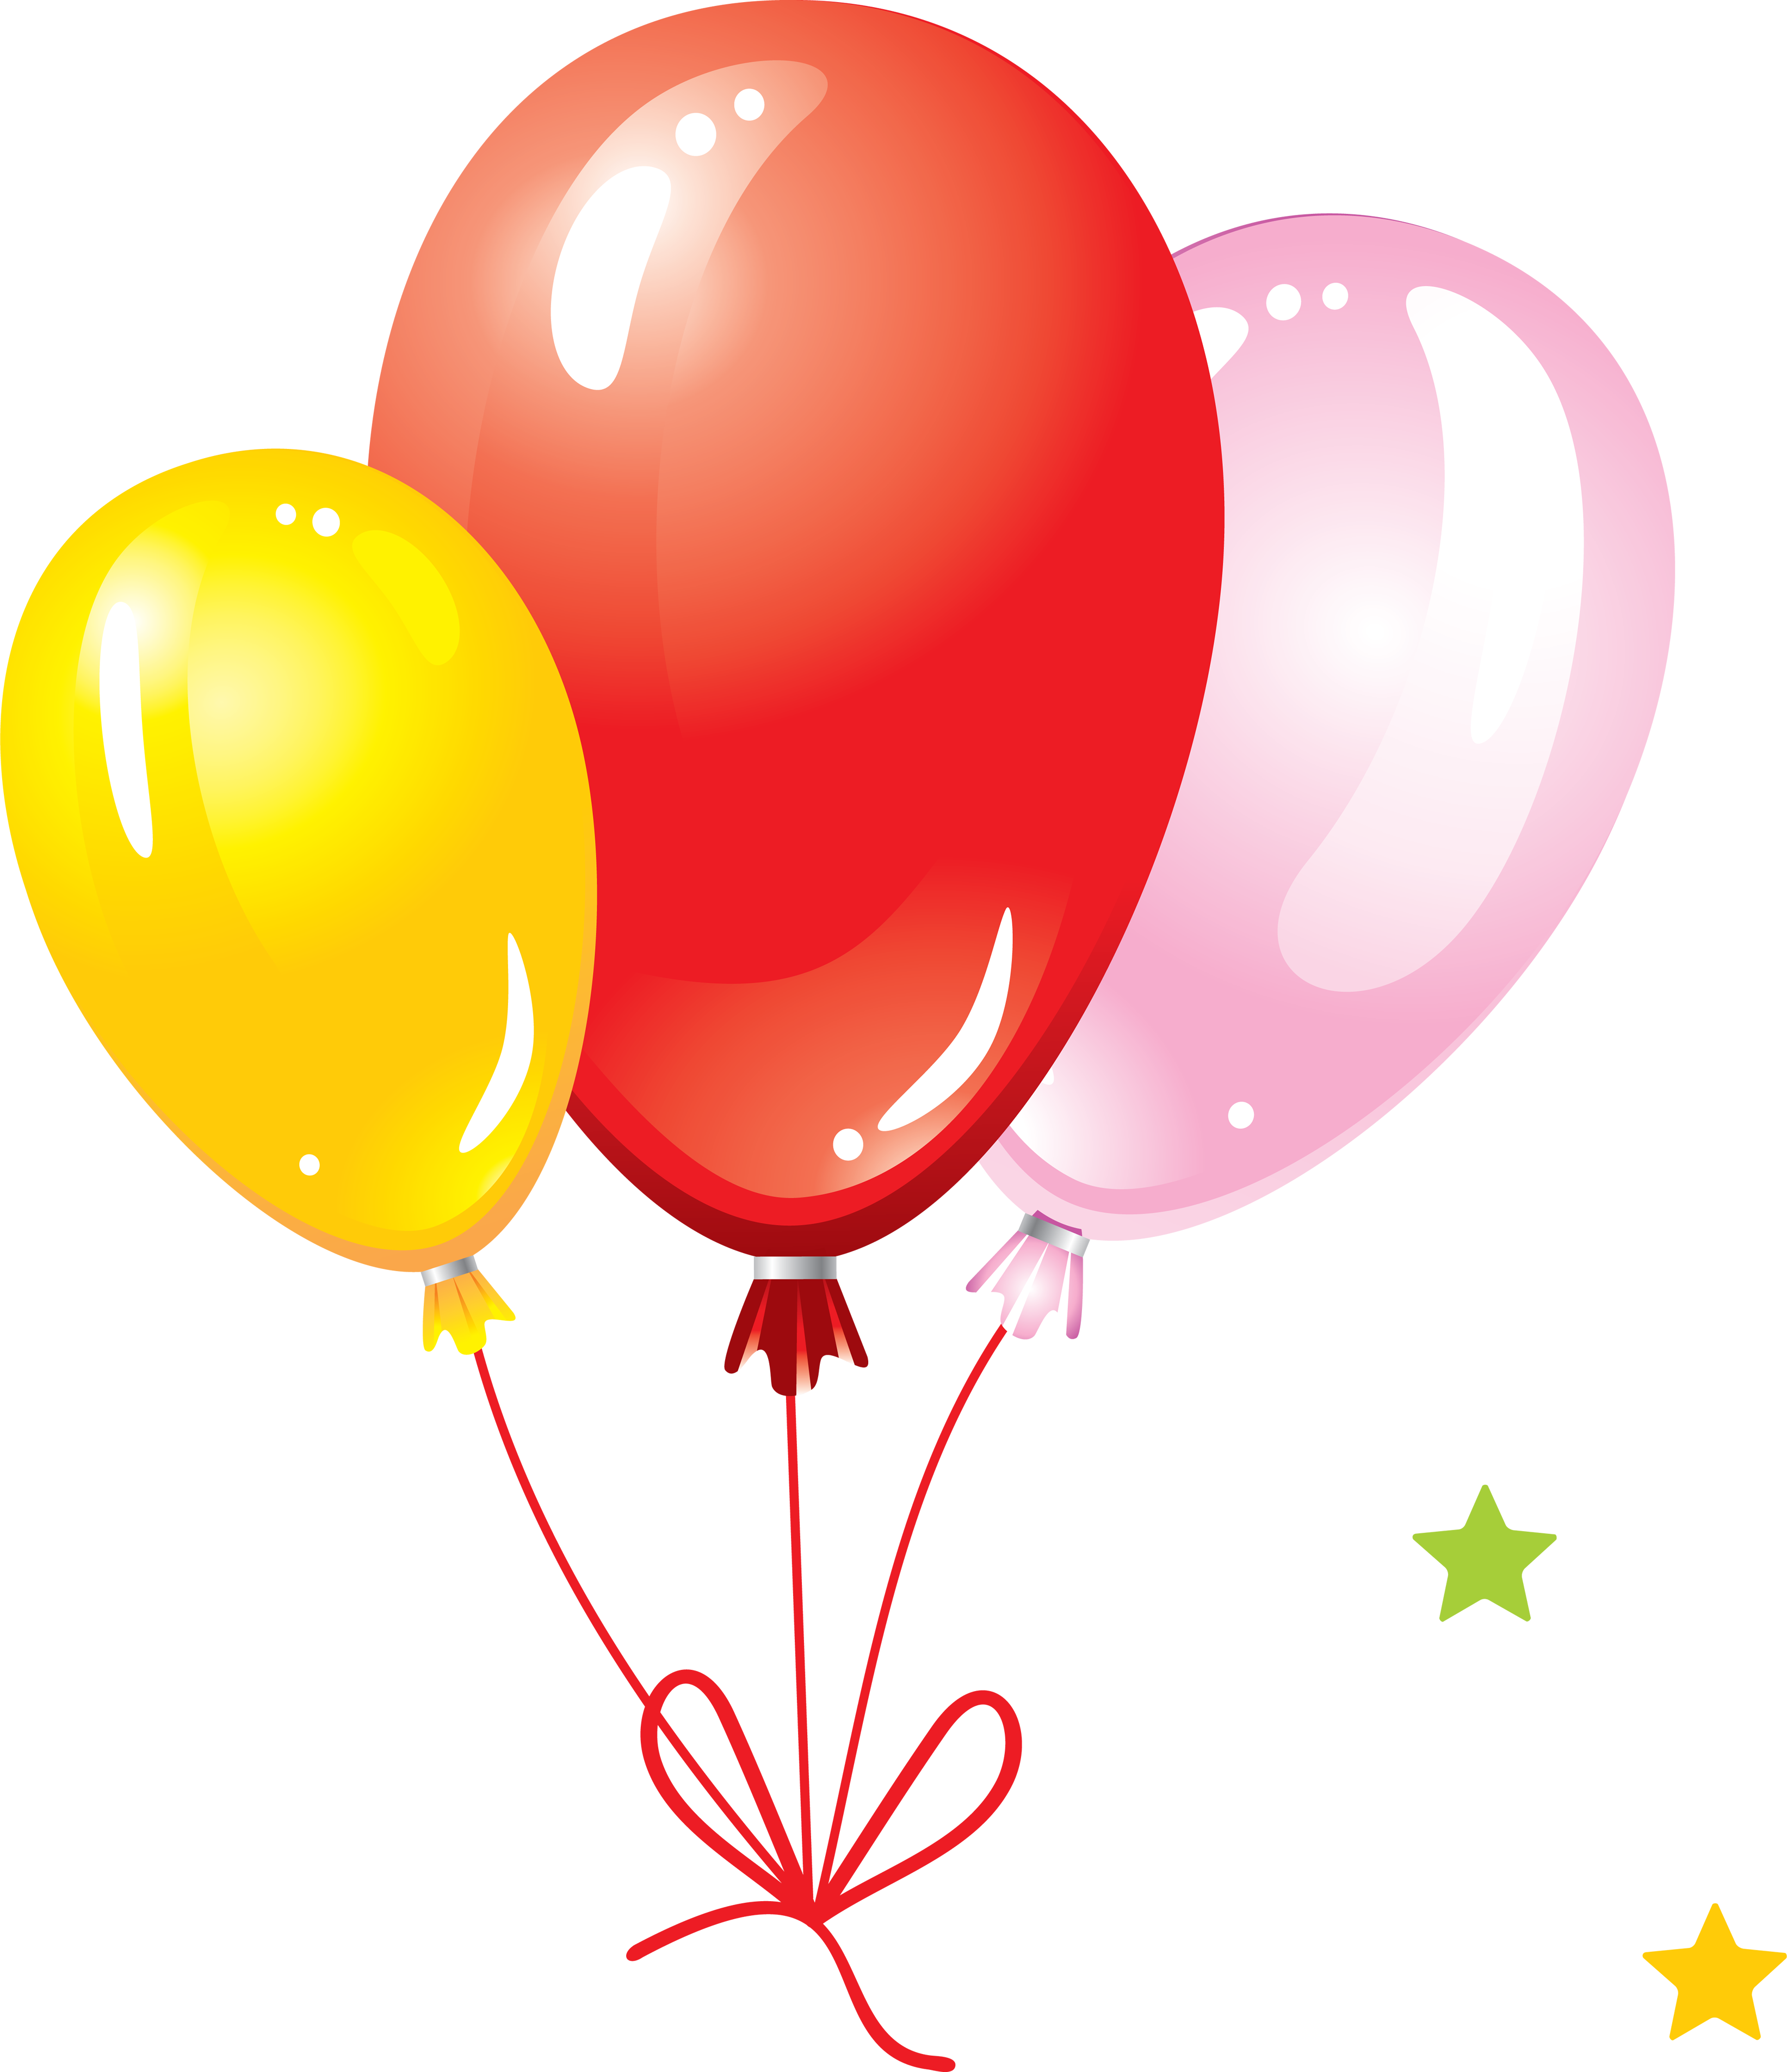 balloon clipart free download - photo #46